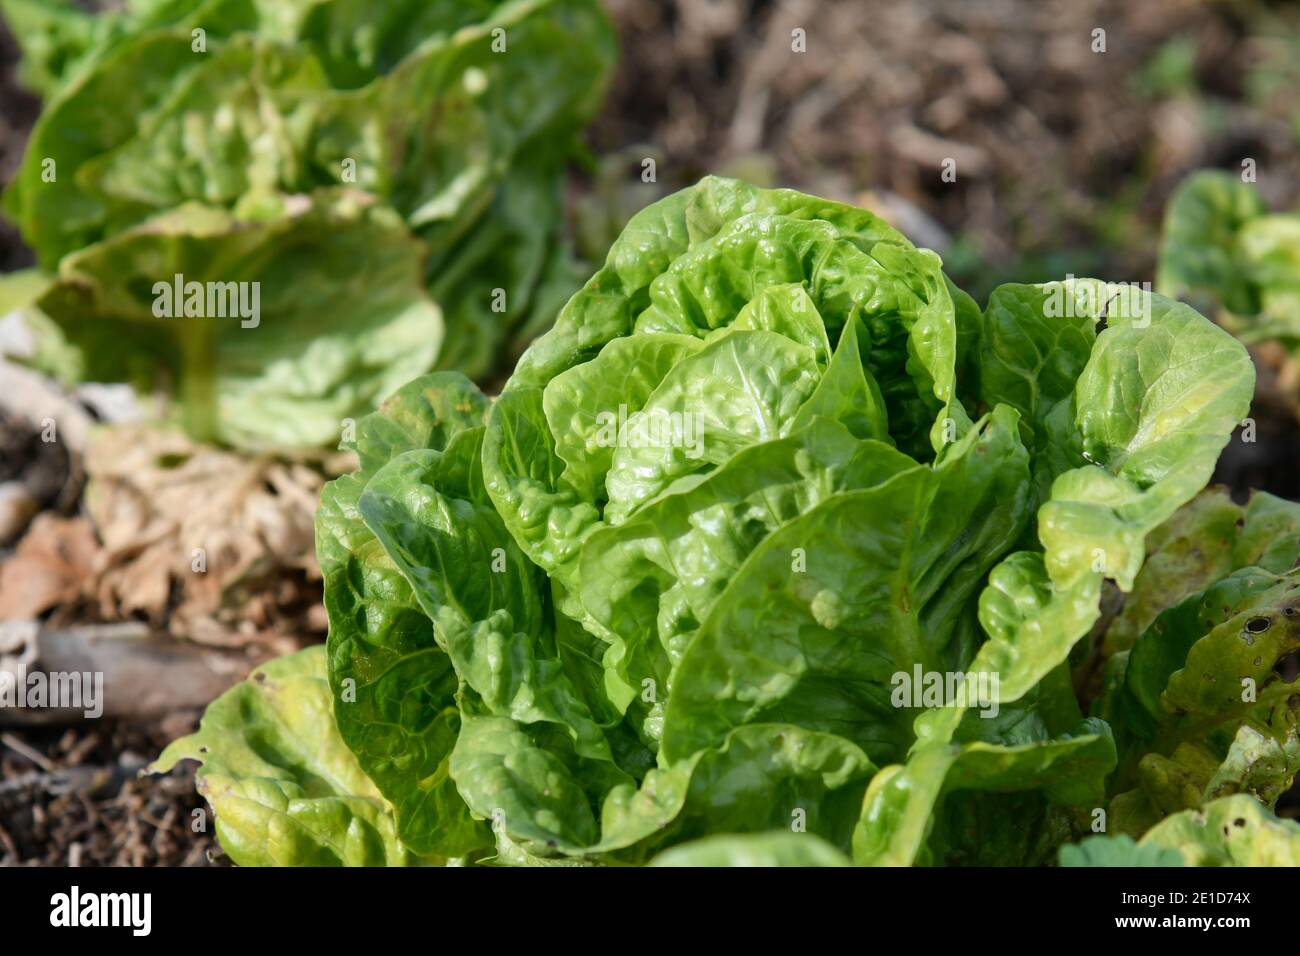 Closeup of a lettuce plant of the bud variety Stock Photo